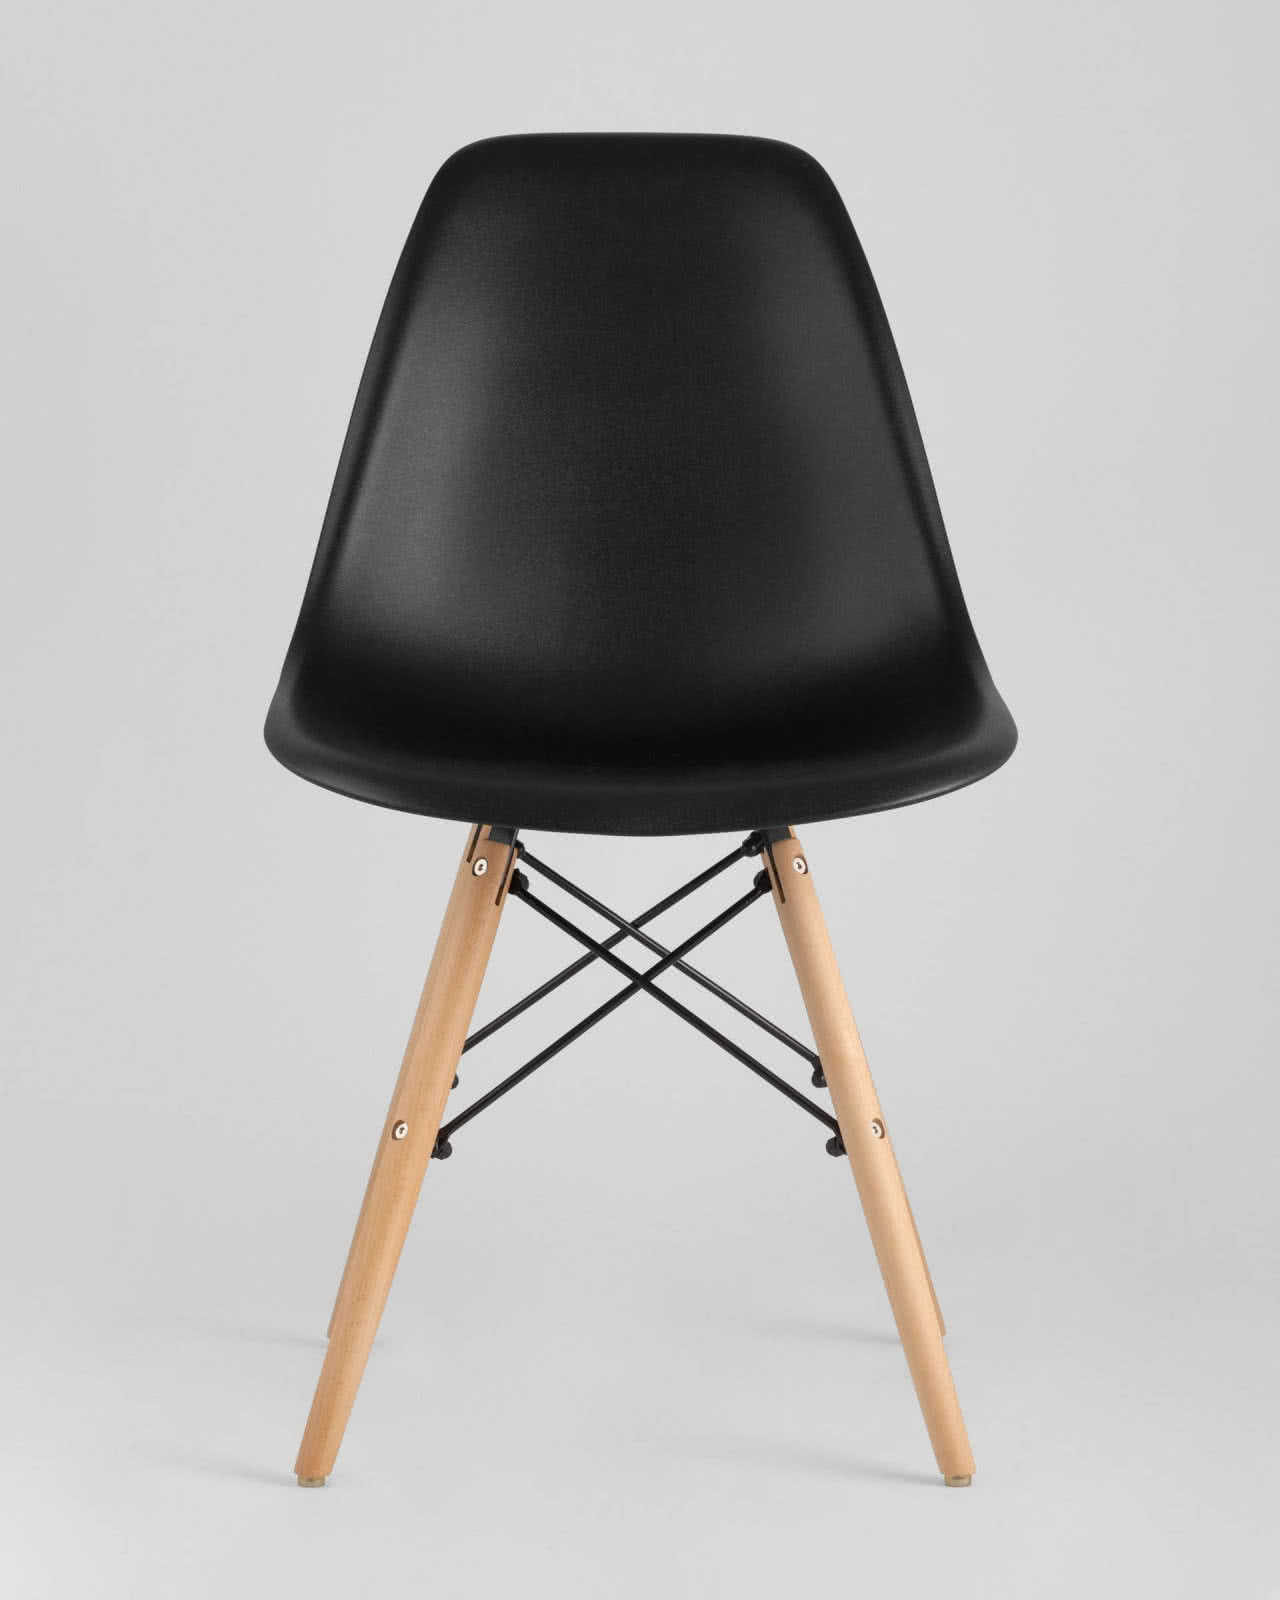  Stool Group Style DSW 